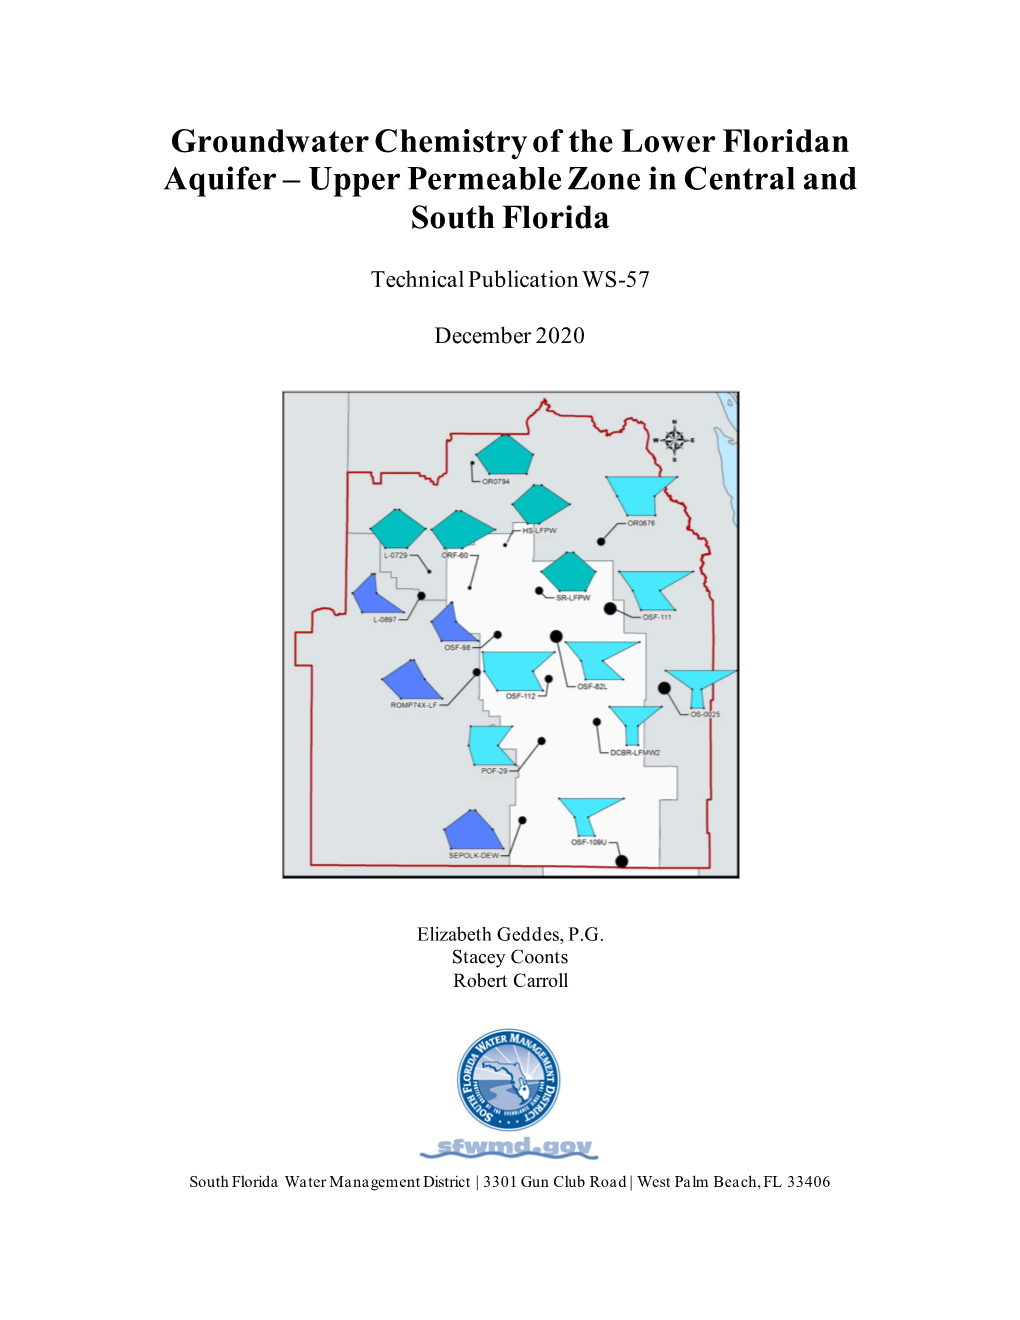 Groundwater Chemistry of the Lower Floridan Aquifer – Upper Permeable Zone in Central and South Florida